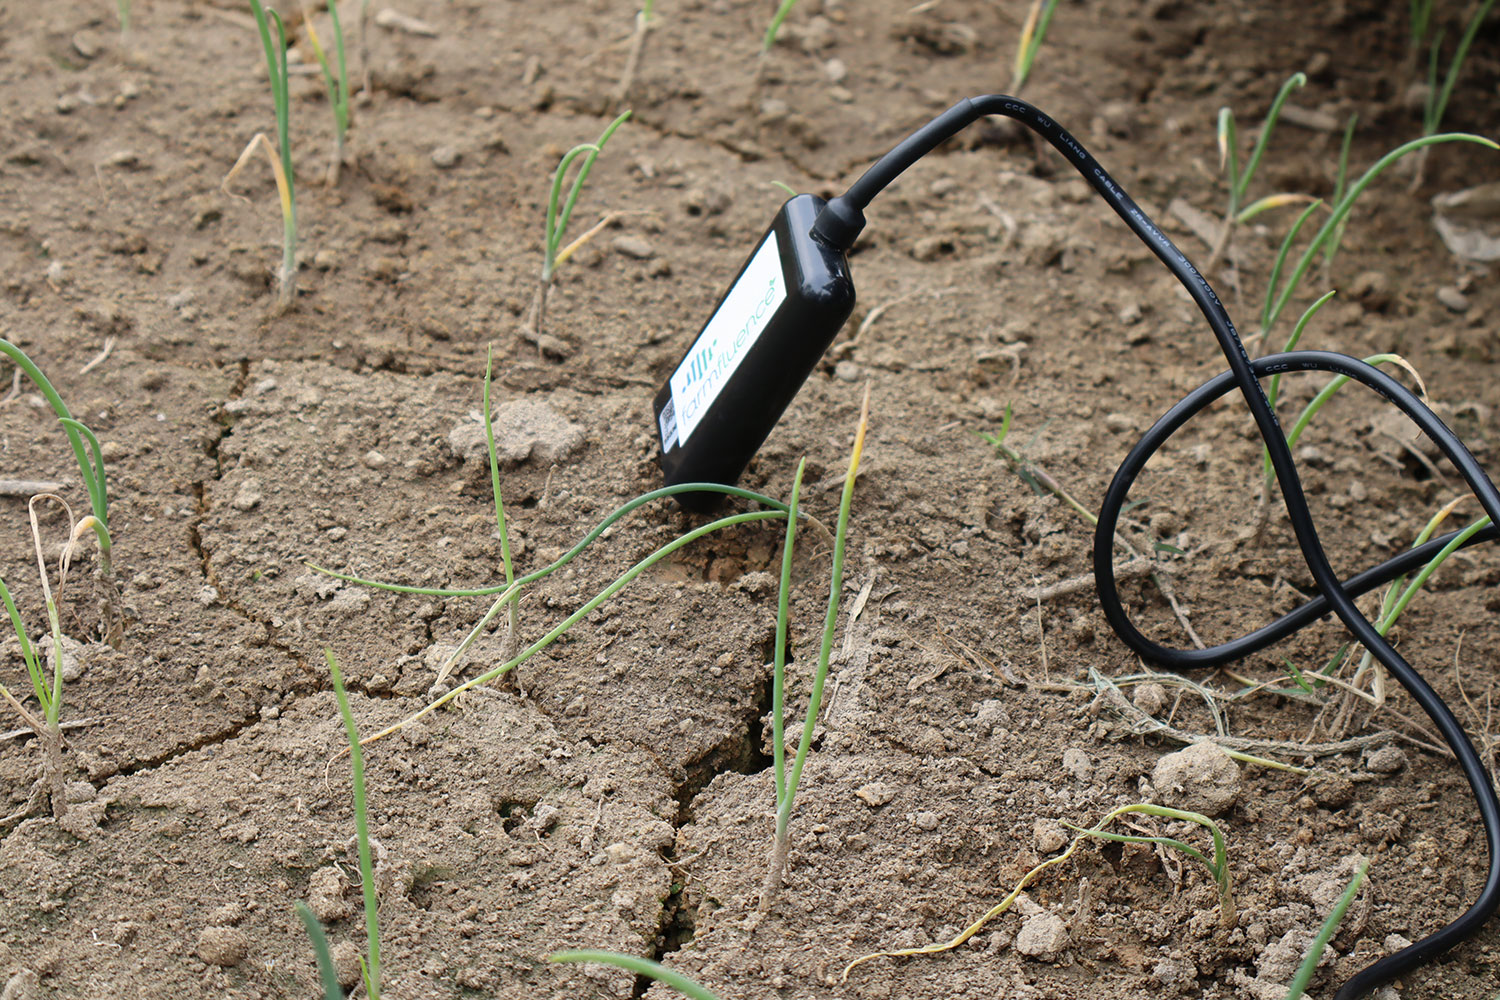 A soil testing device is put in the soil of Marjina's farm in Bangladesh.